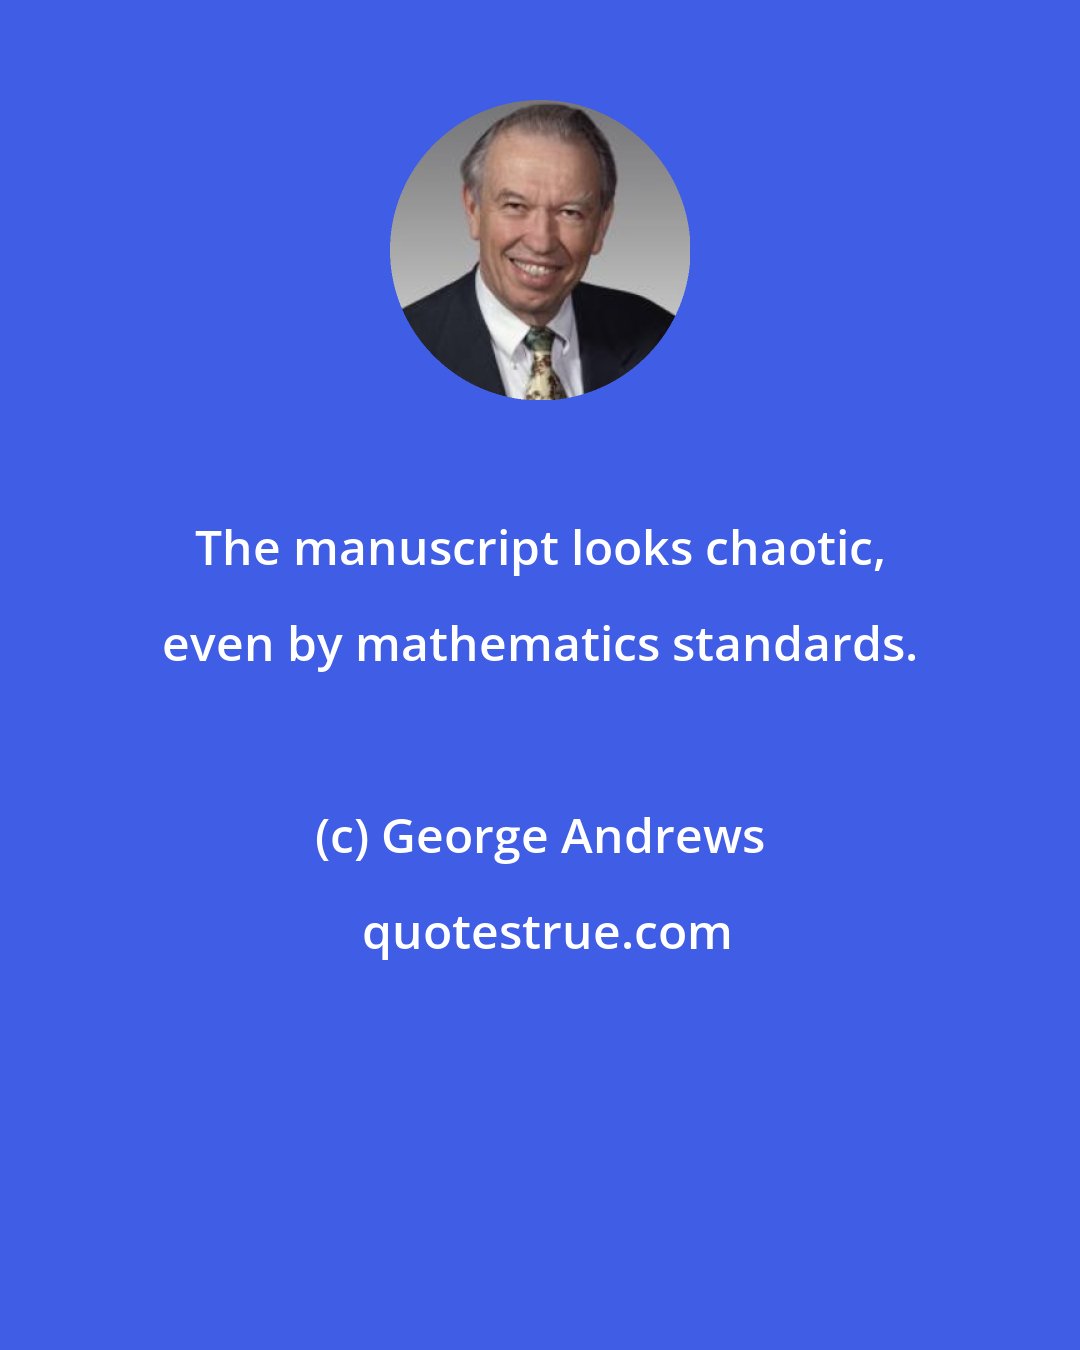 George Andrews: The manuscript looks chaotic, even by mathematics standards.